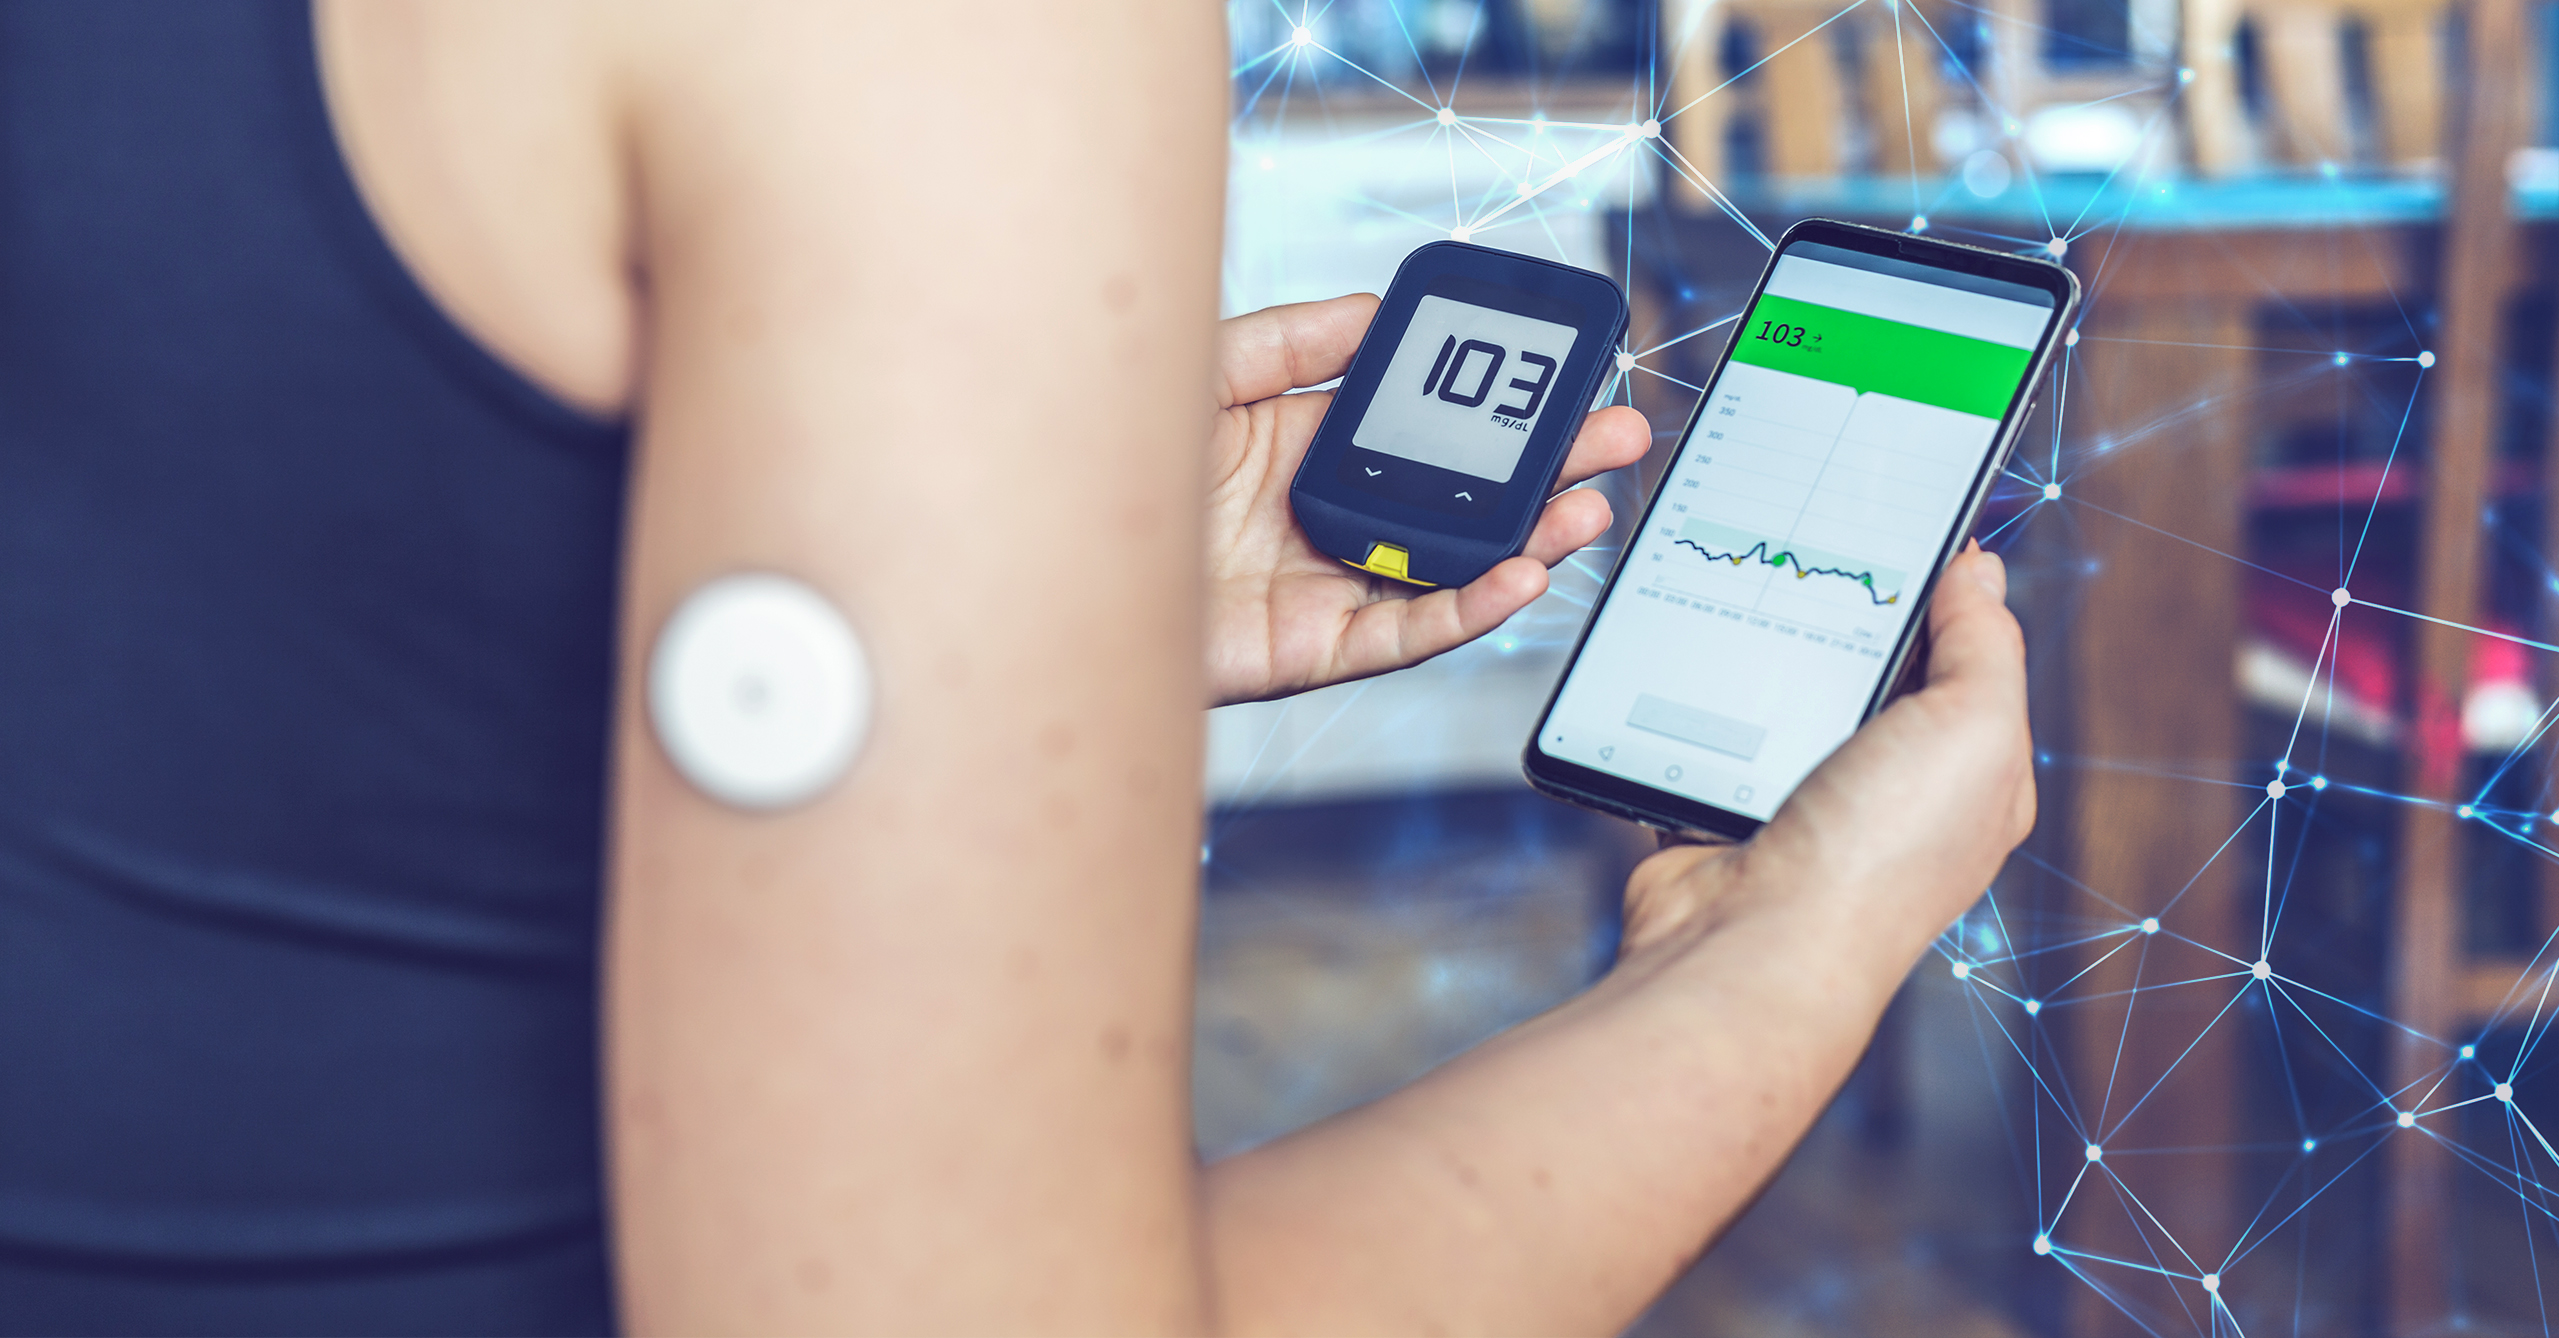 Securing IoT Devices in Healthcare